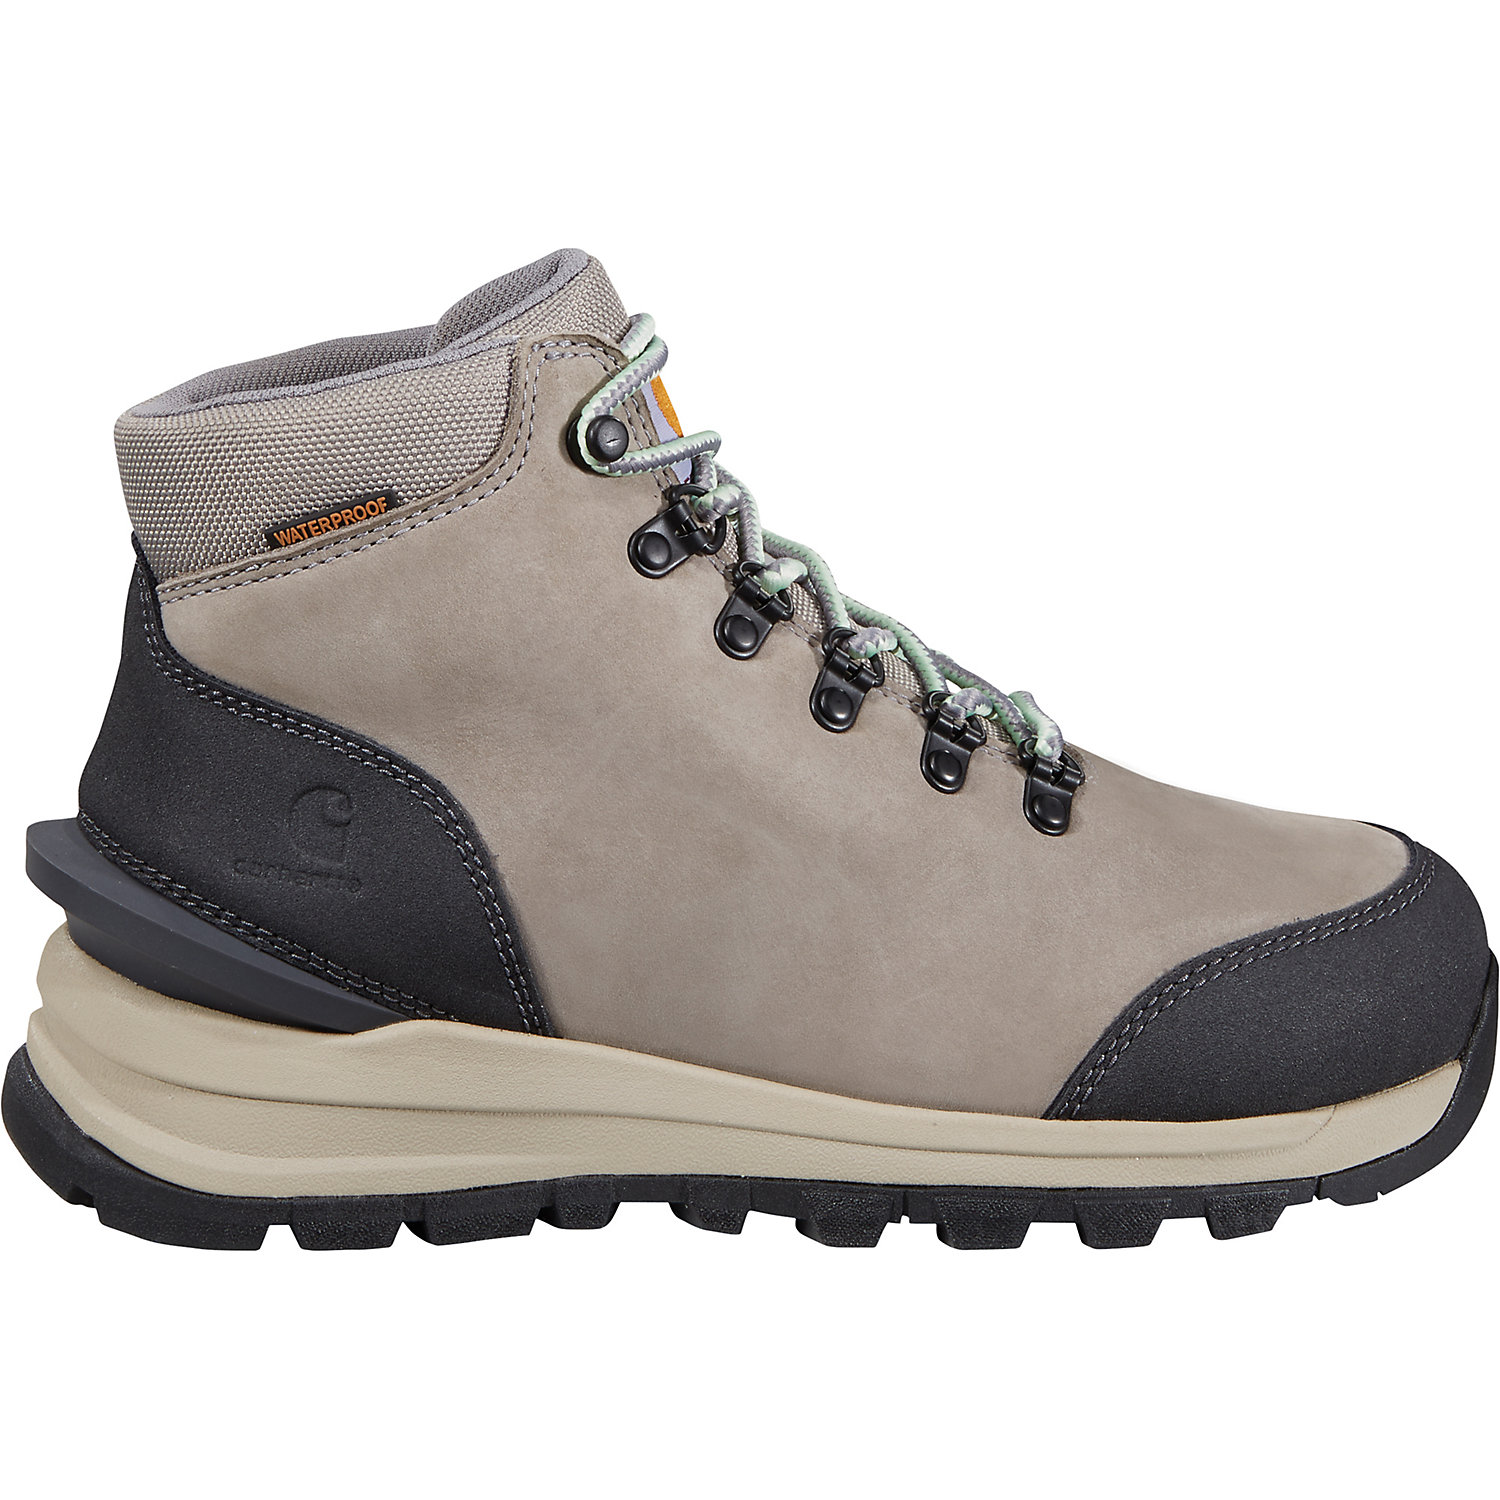 Carhartt Womens Gilmore Waterproof 5 Inch Hiker Boot - Non-Safety Toe